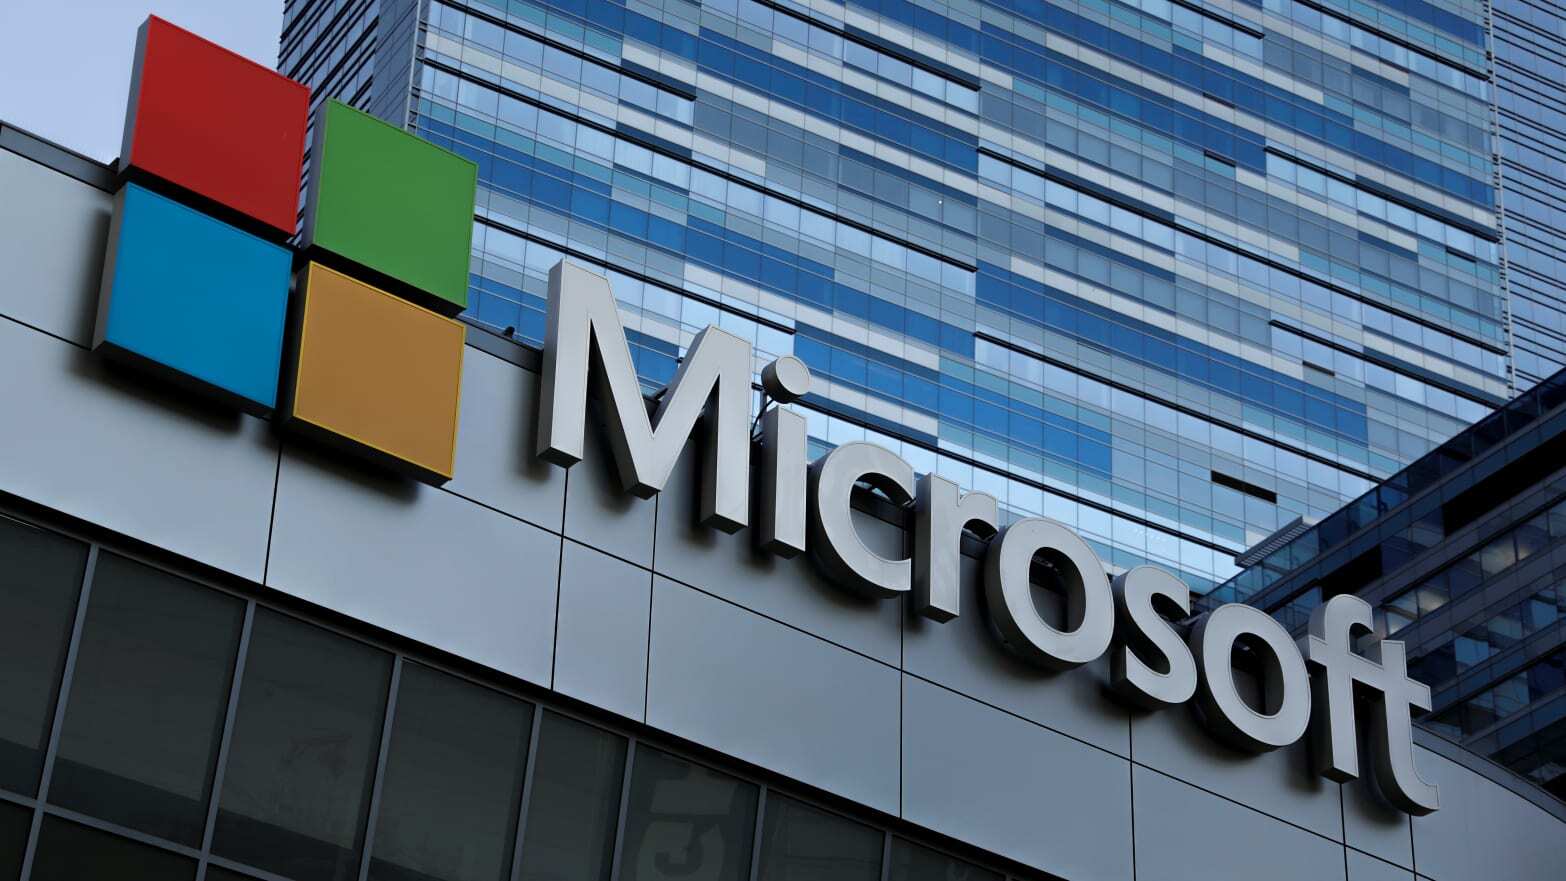 Microsoft Reports Russian Hackers Targeted Emails of Senior Leaders